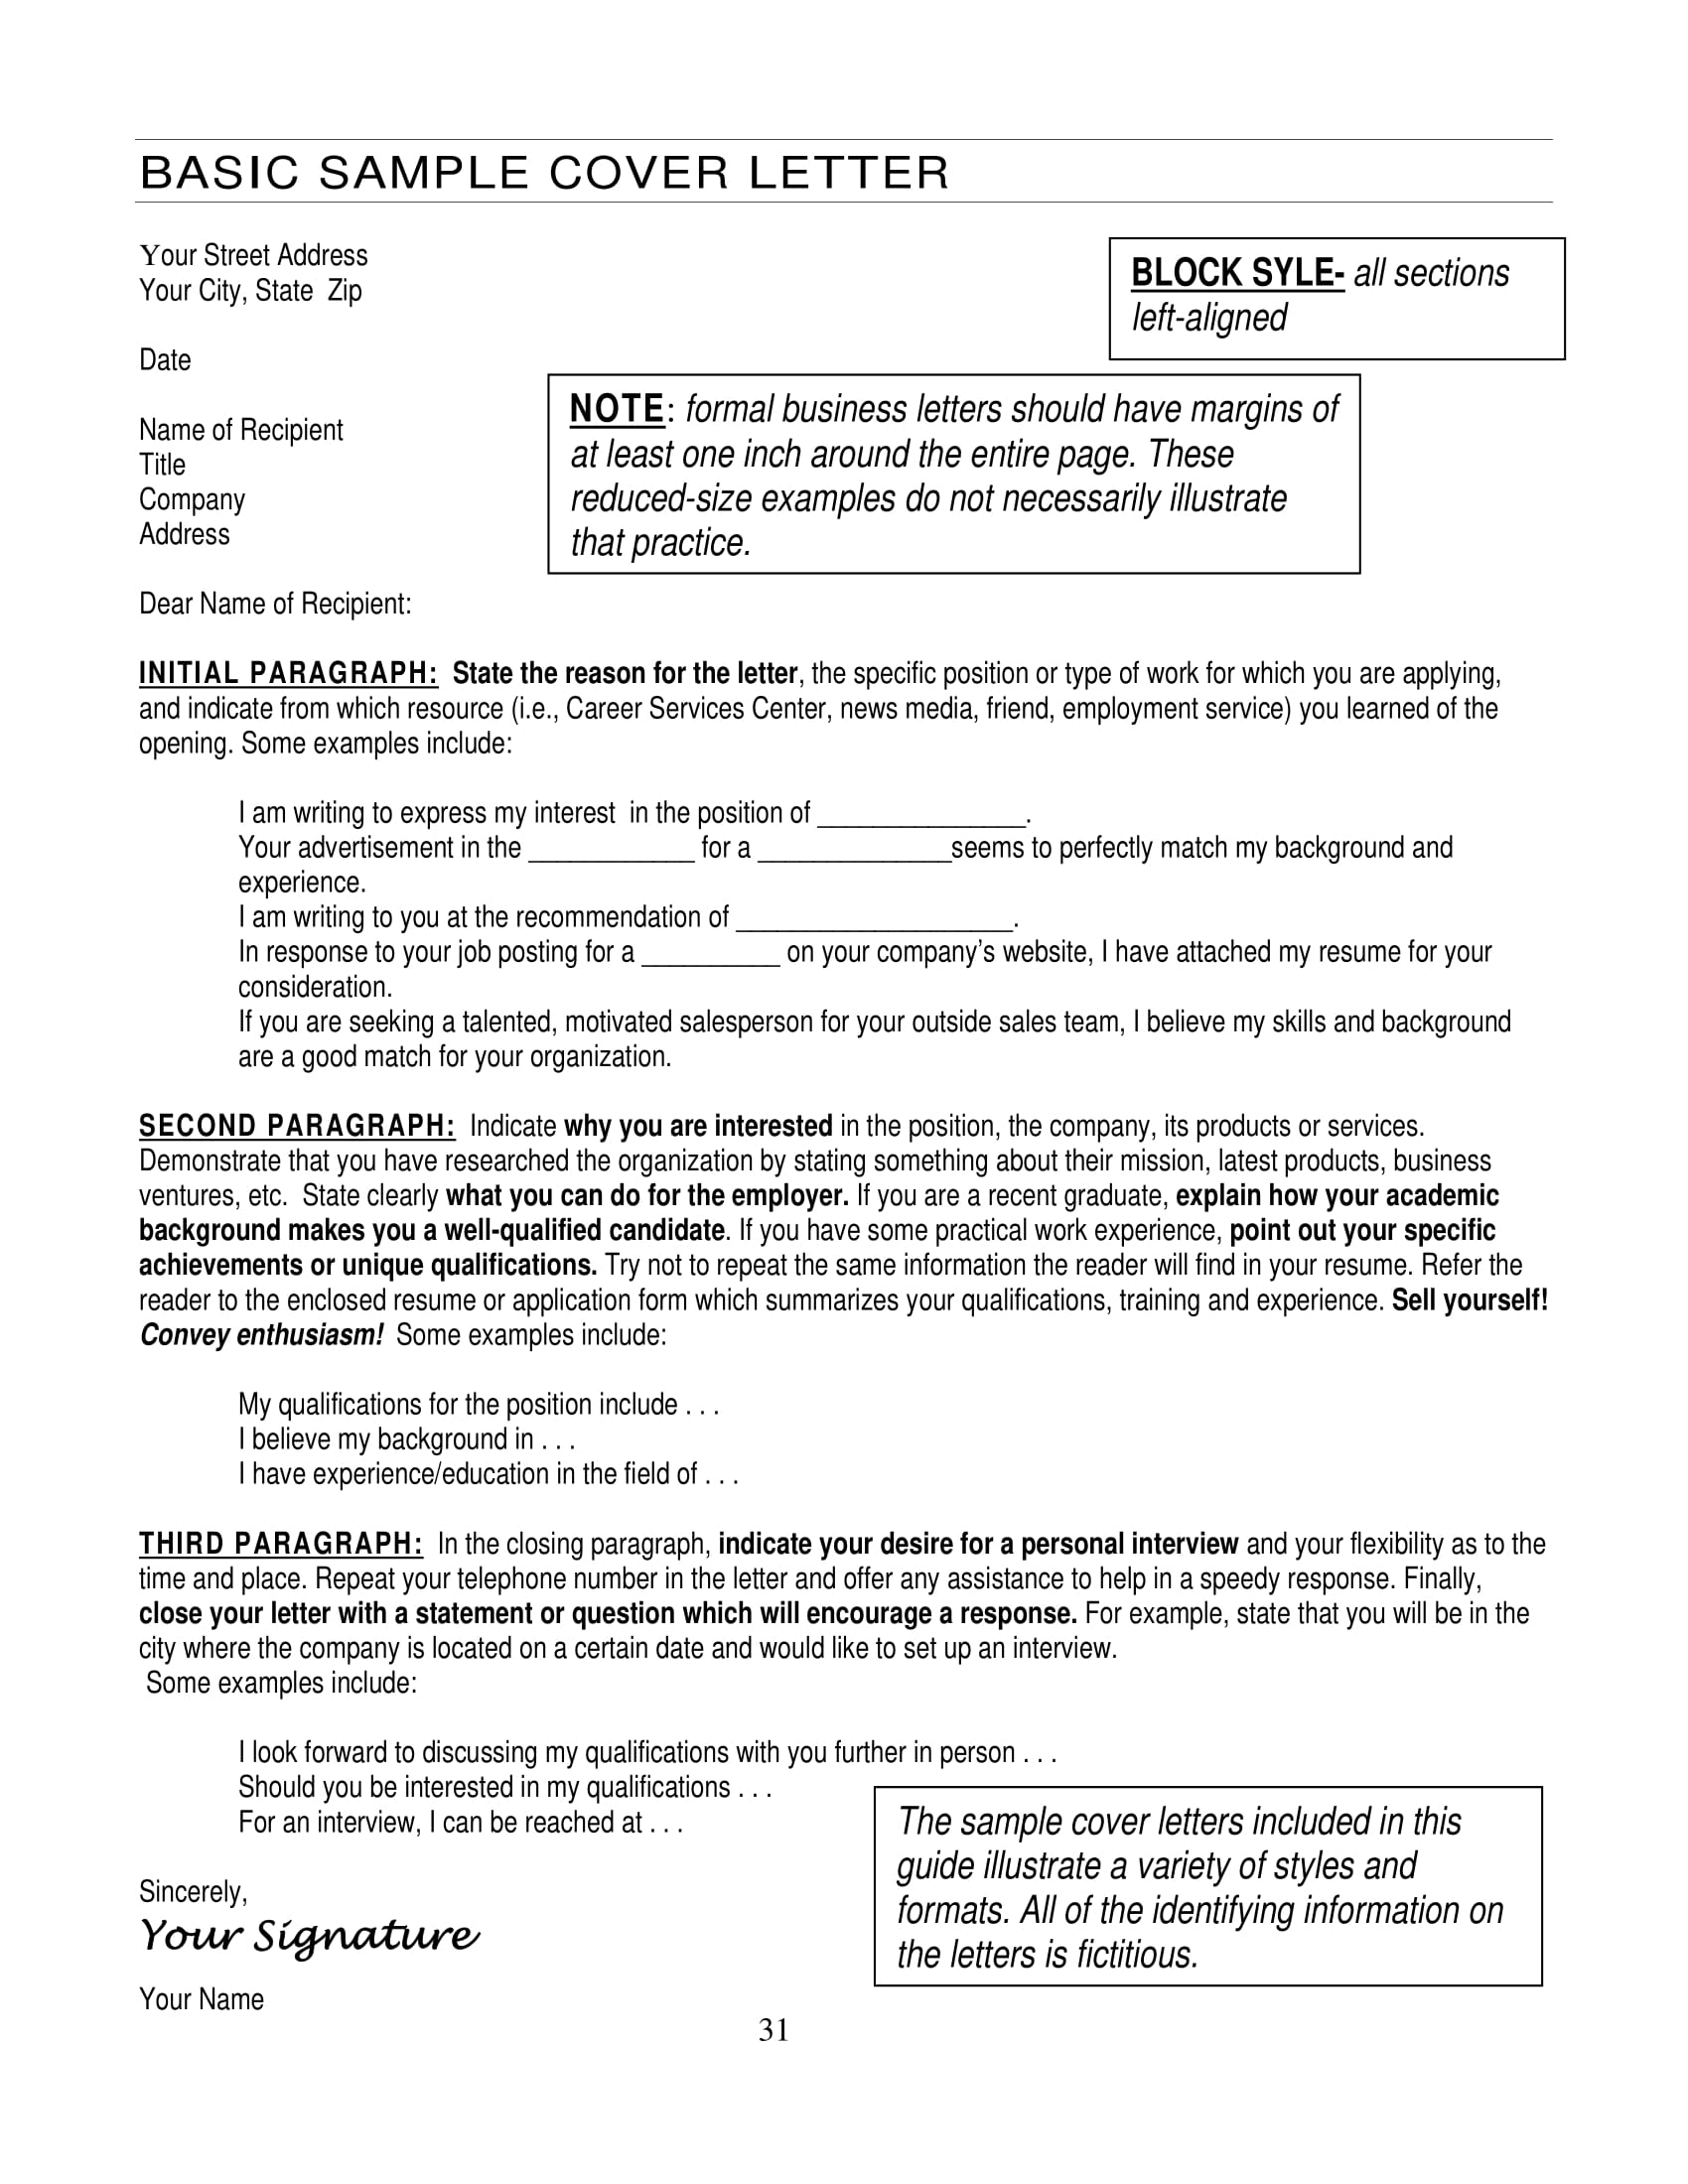 19+ Job Application Letter Examples - PDF | Examples